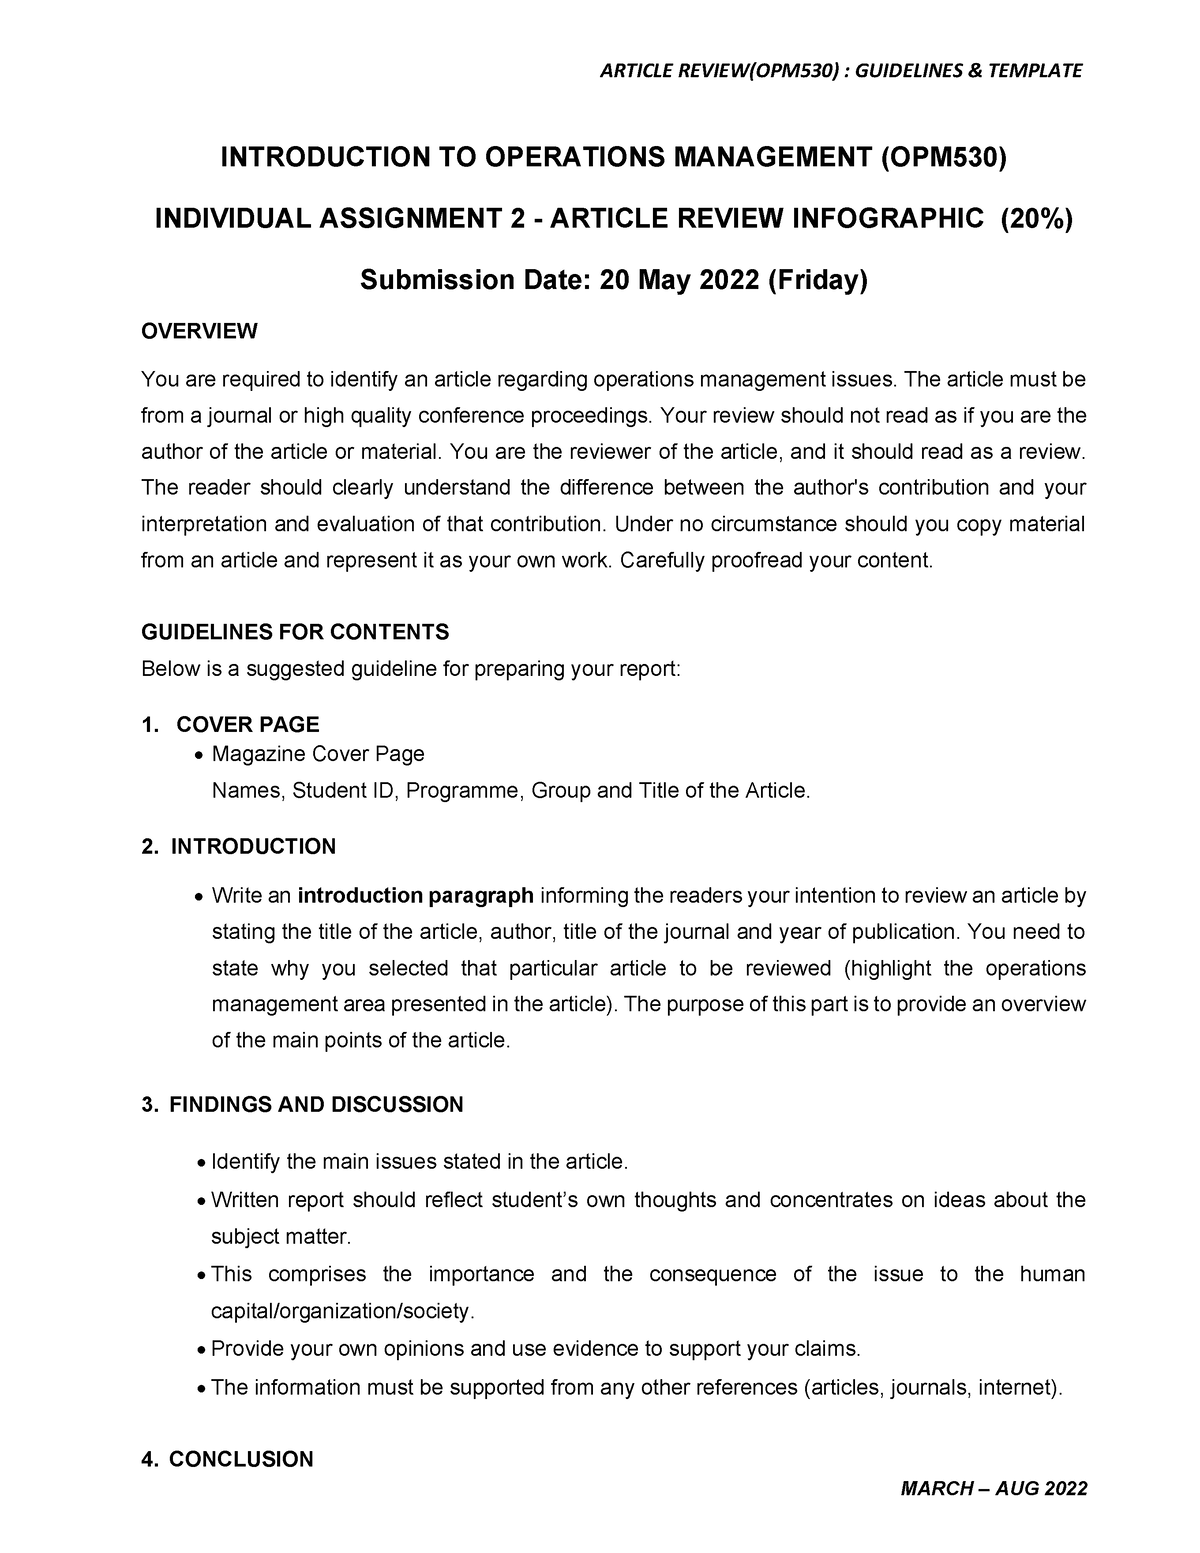 opm530 individual assignment article review